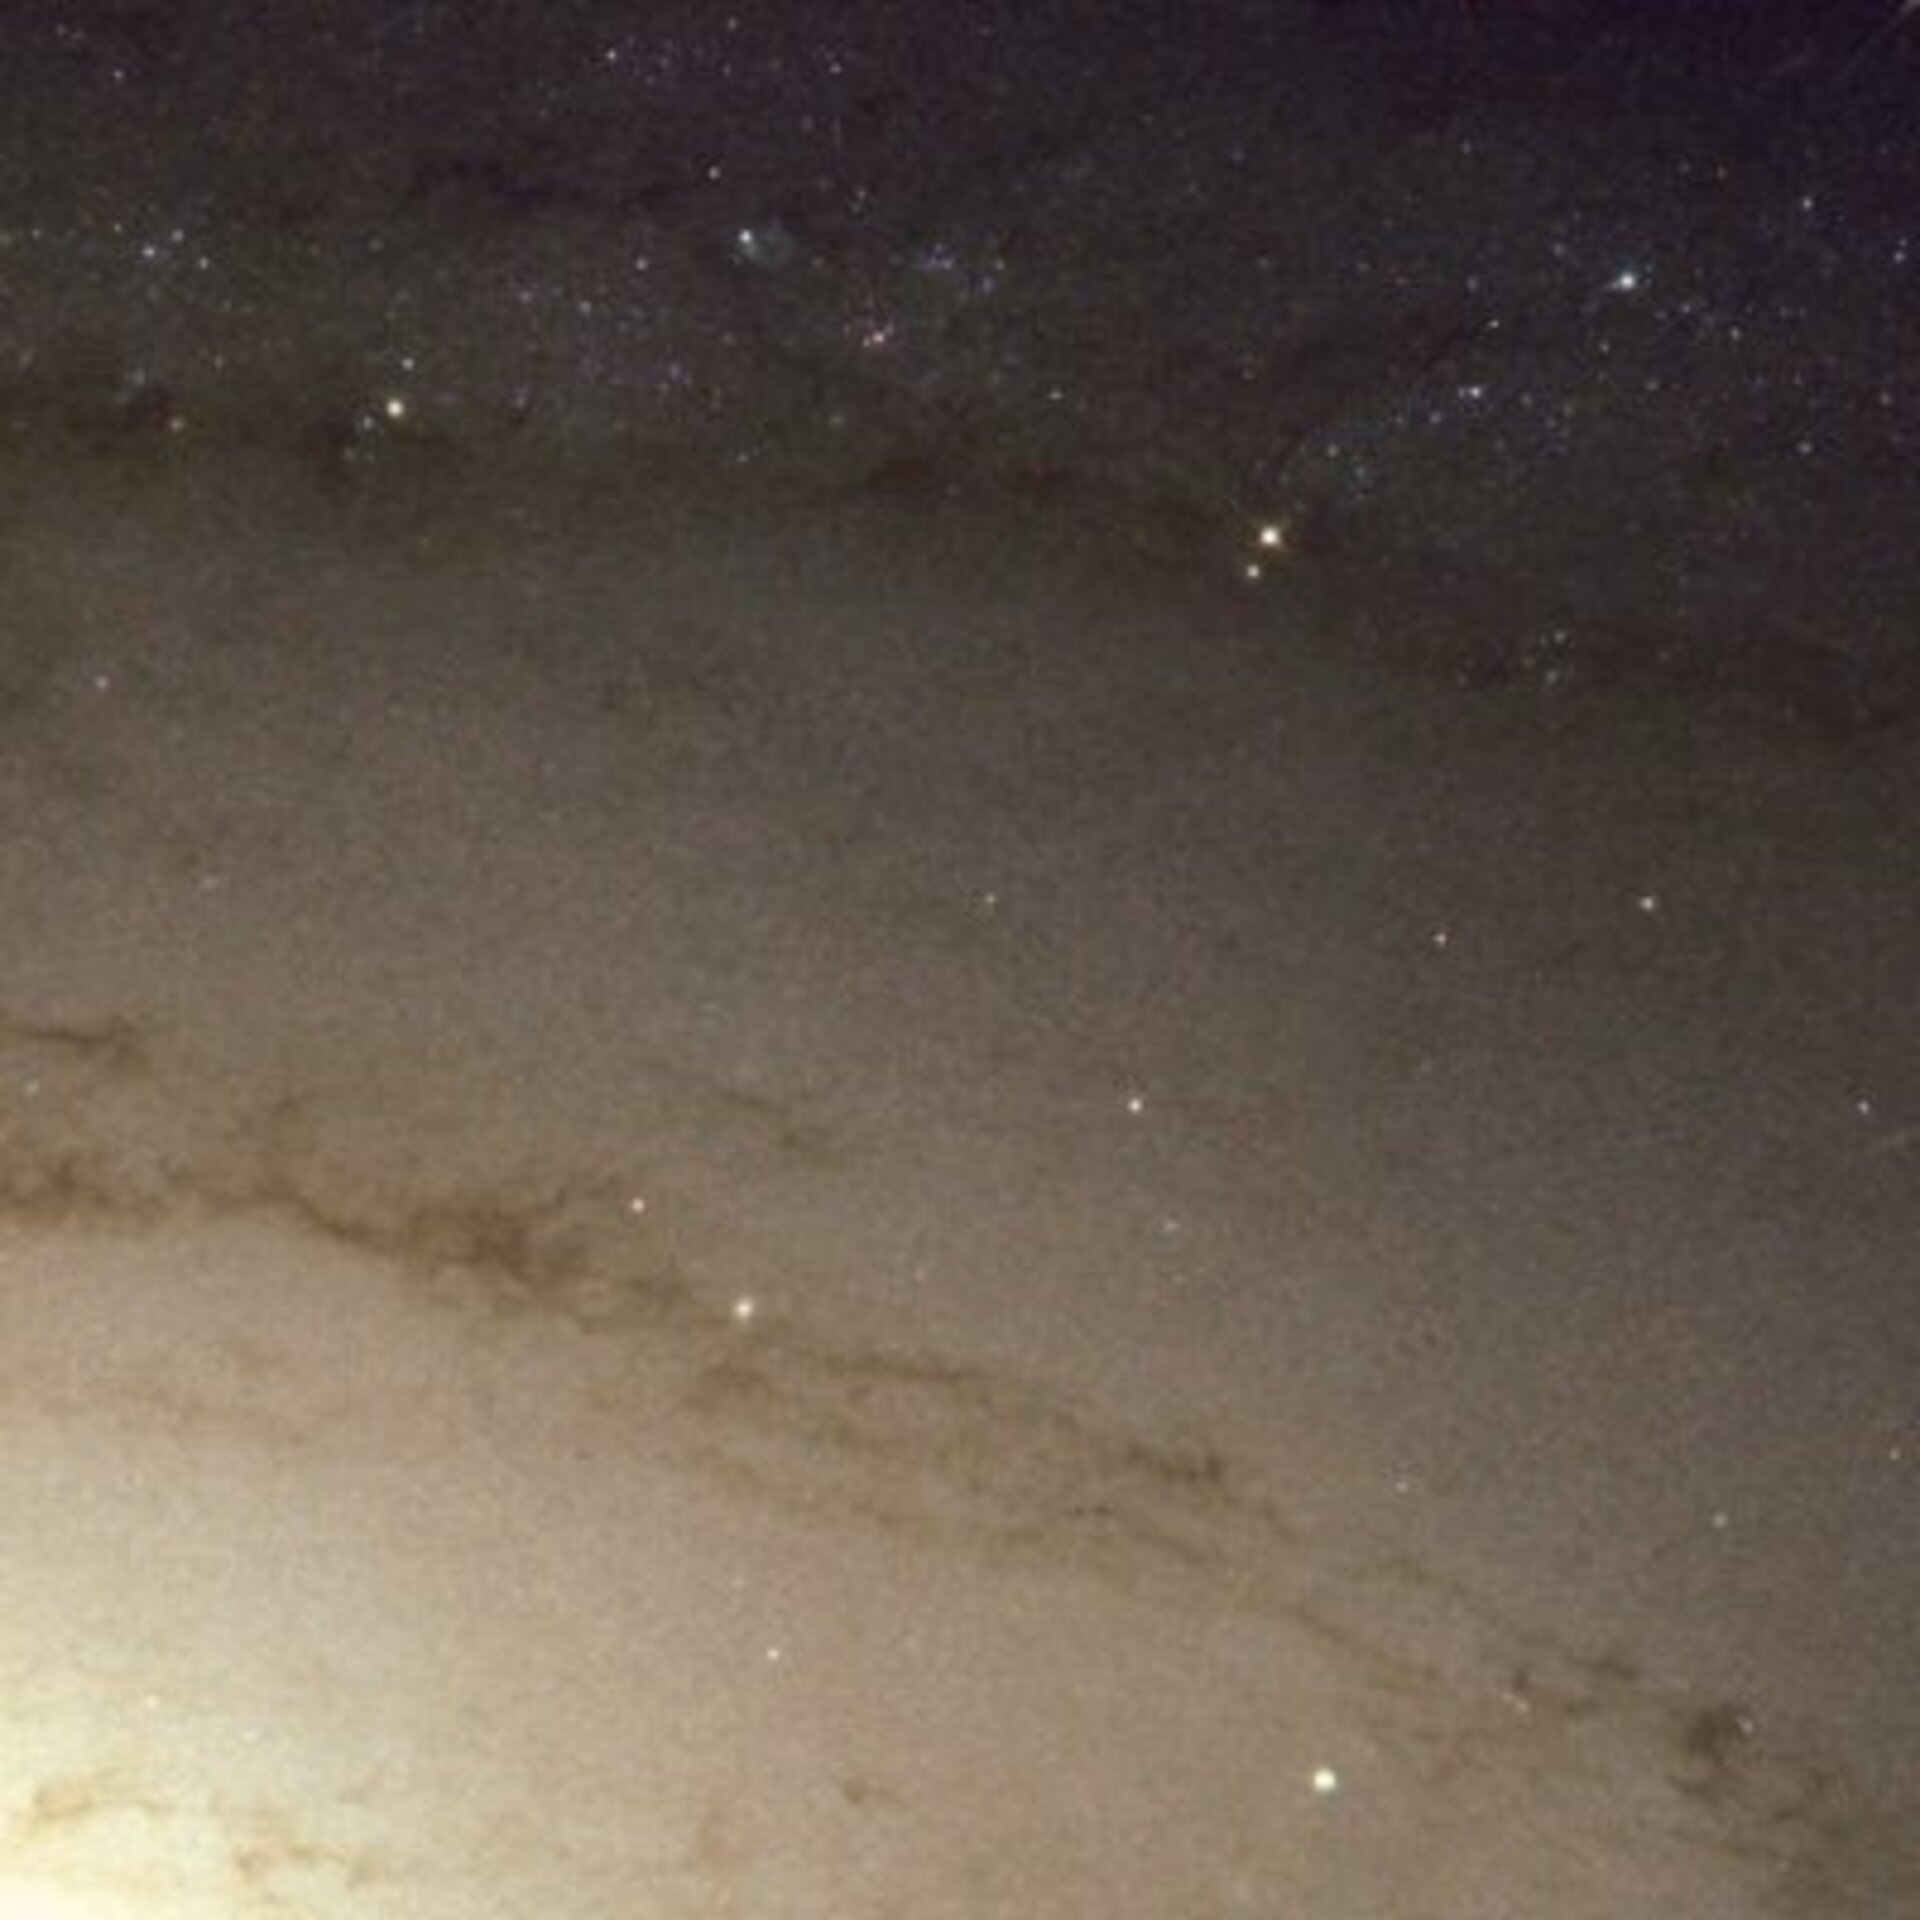 Messier 81 spiral arm (WFPC2 image)